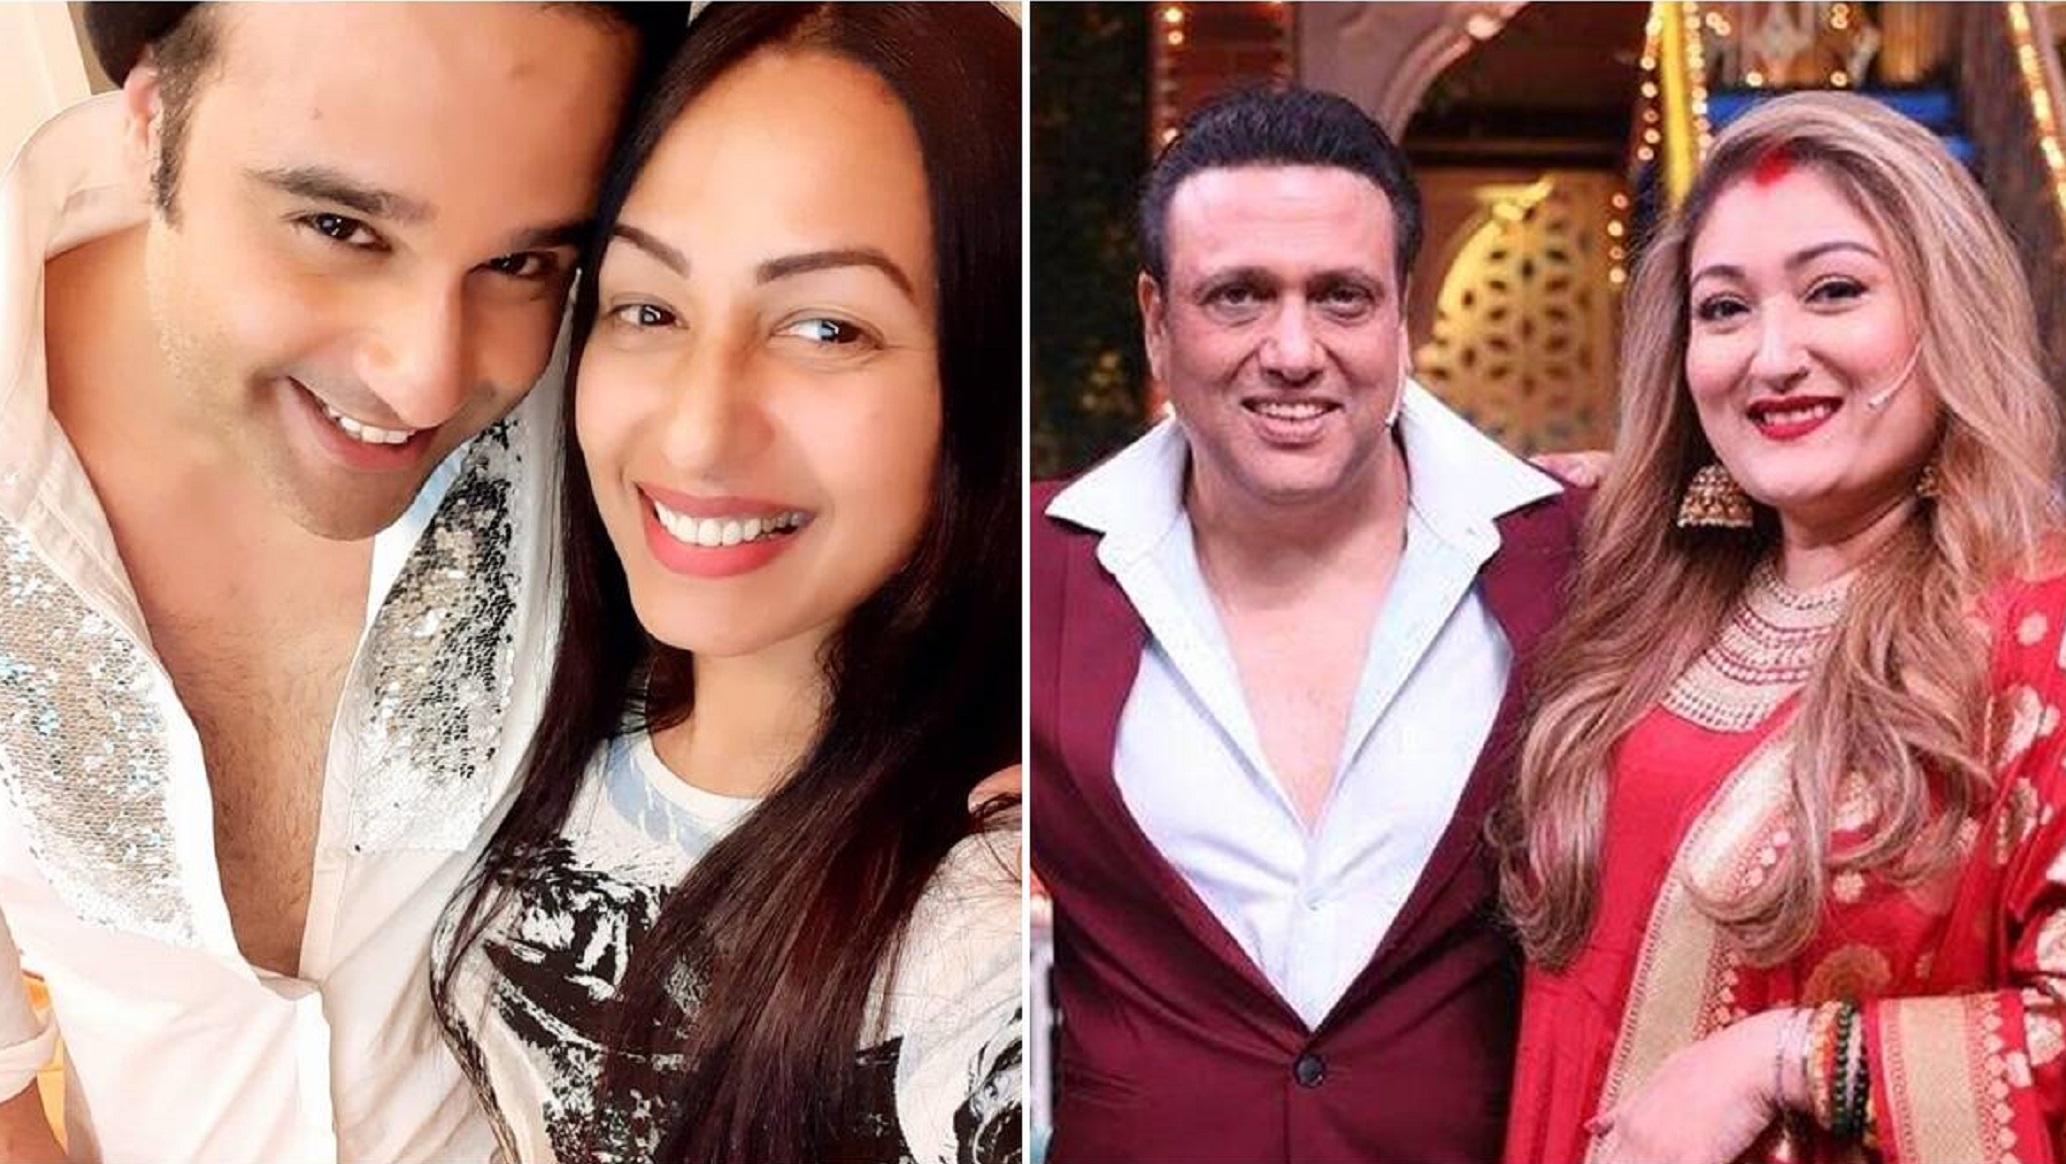 ‘Problem Starts When You Bring Bad Daughter-In-Law’: Says Govinda’s Wife Sunita, Over Spat With Kashmera Shah